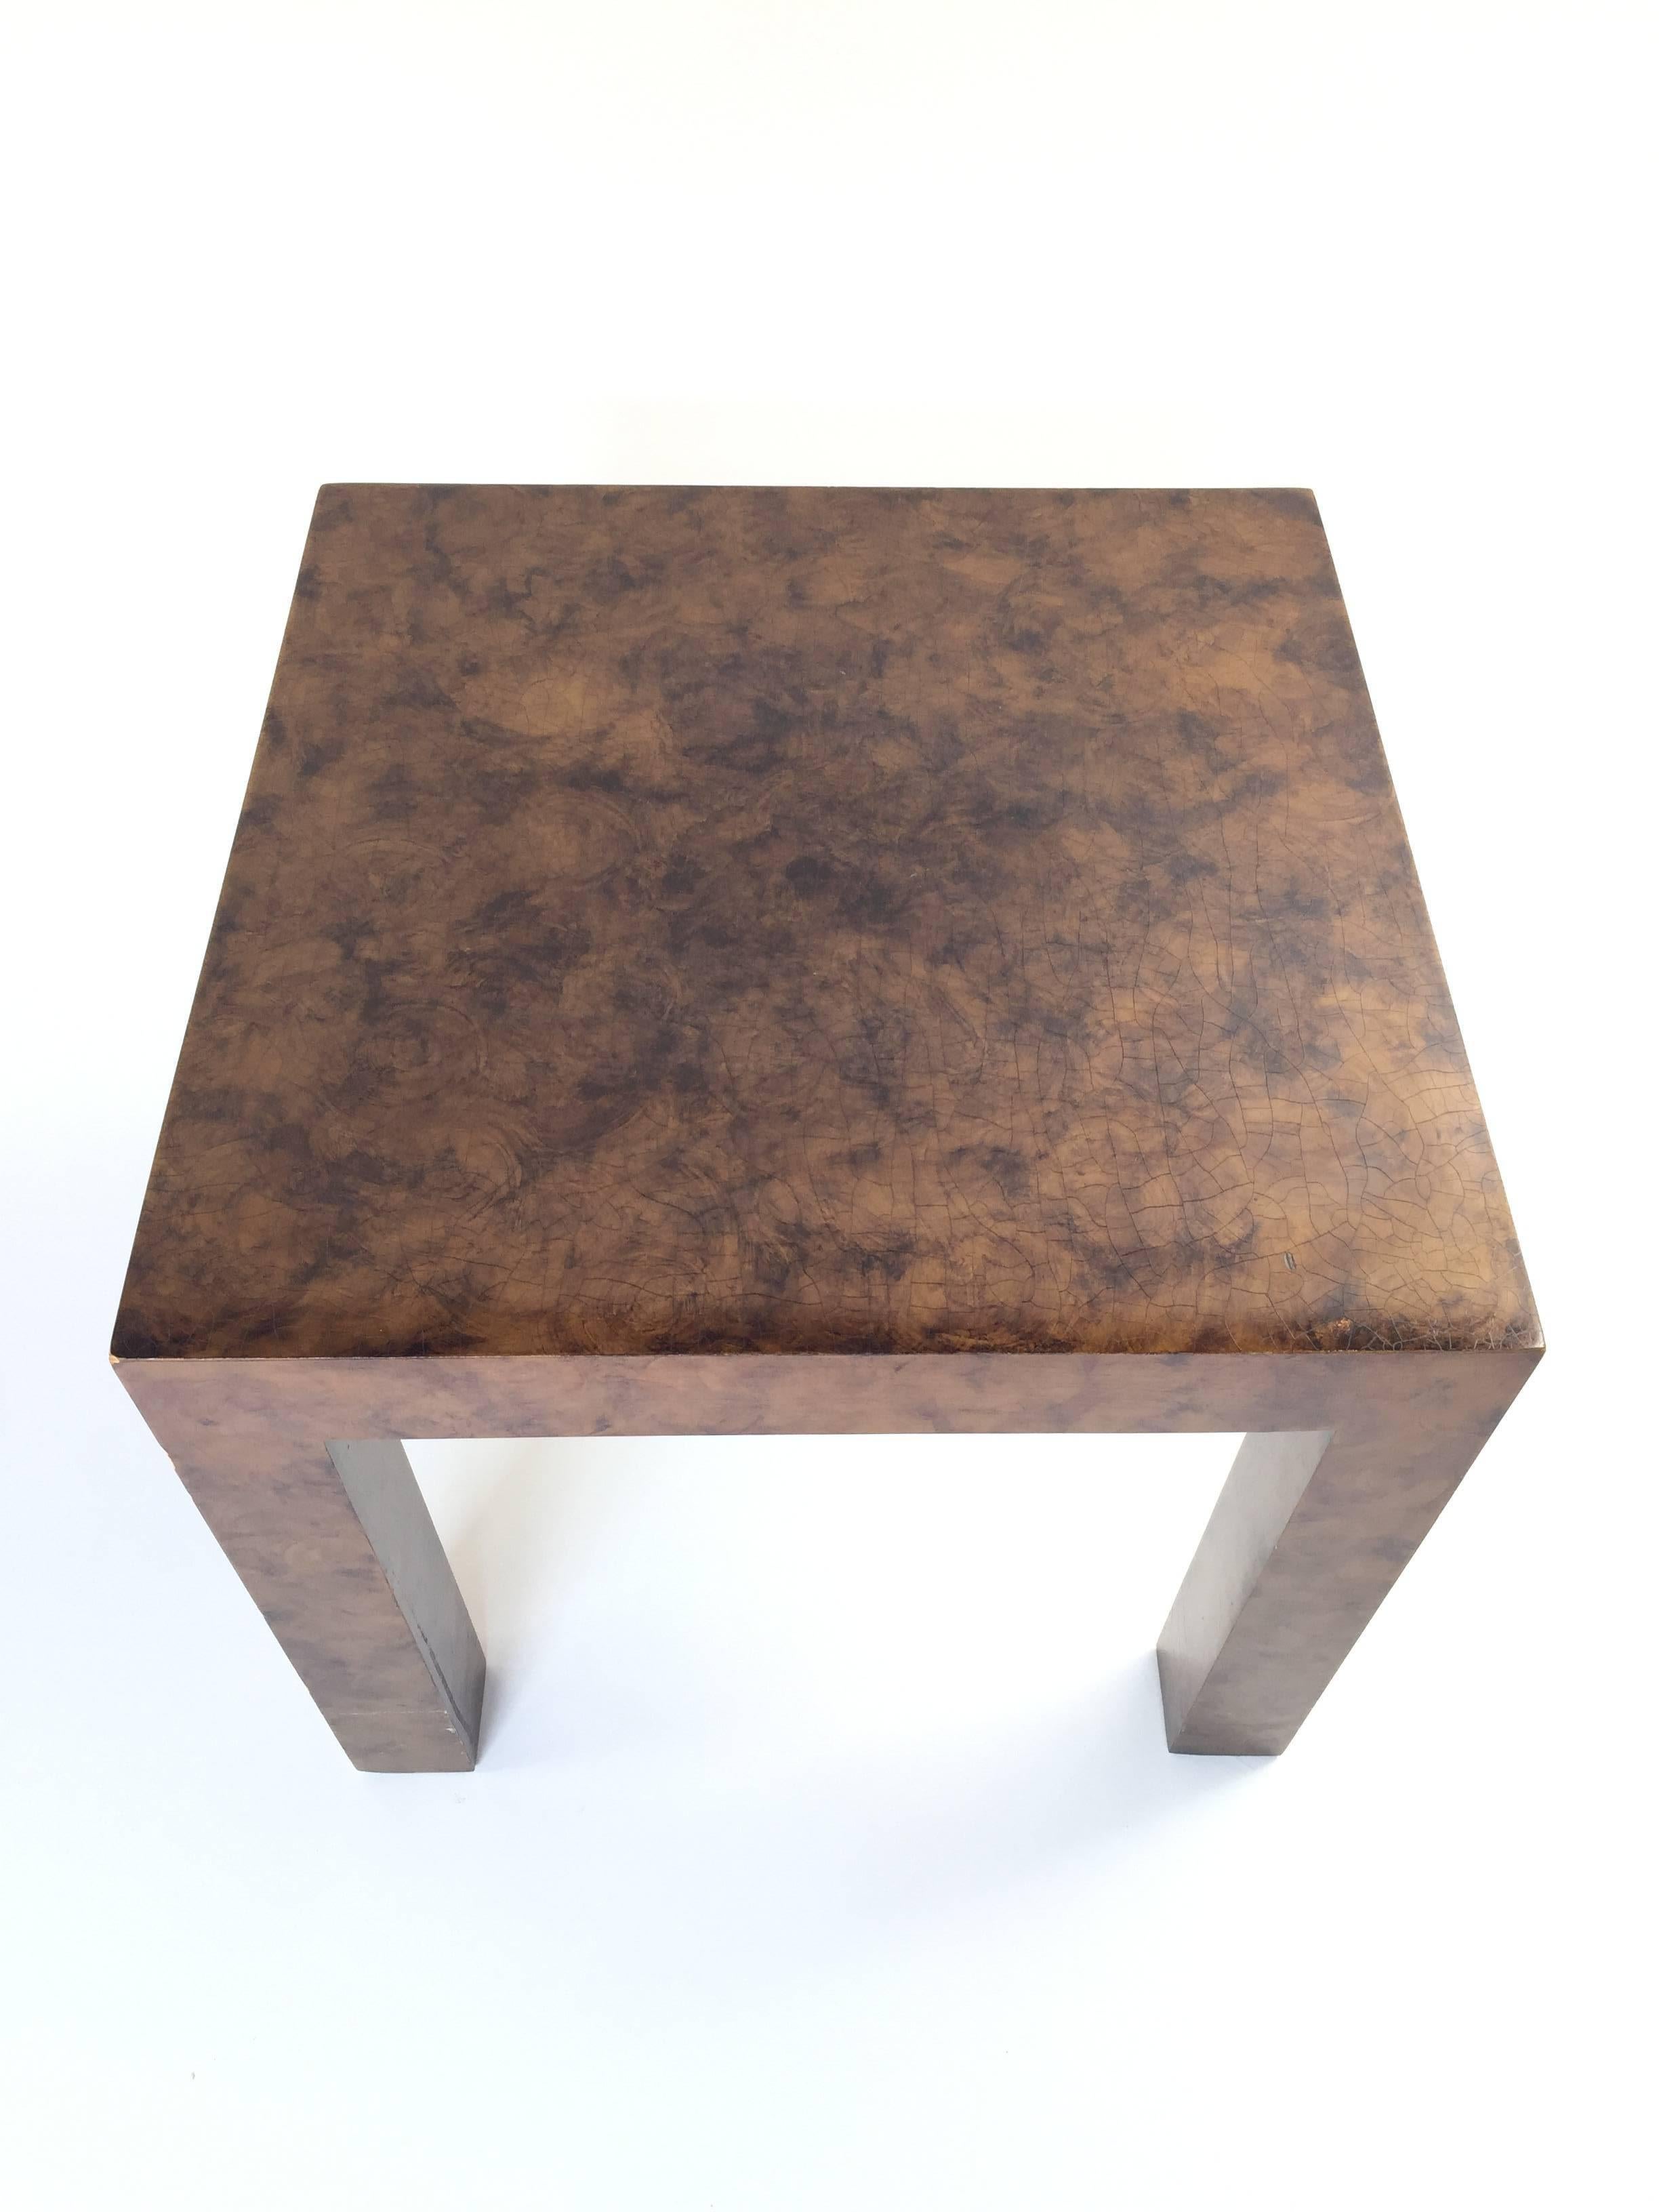 Trio of Burl Wood End Tables by Milo Baughman for Thayer Coggin In Excellent Condition For Sale In Berkeley, CA